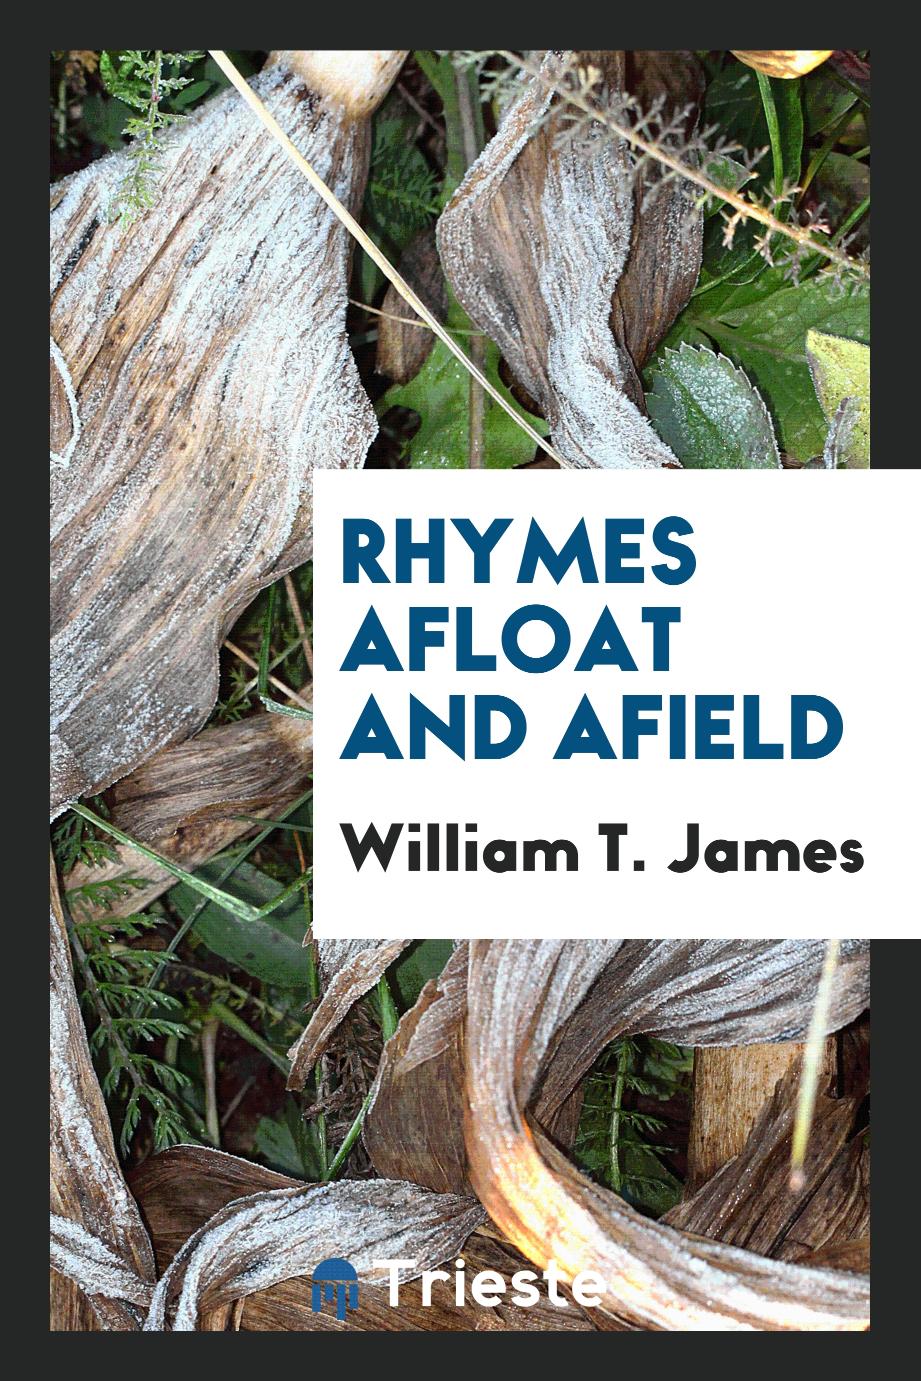 Rhymes Afloat and Afield